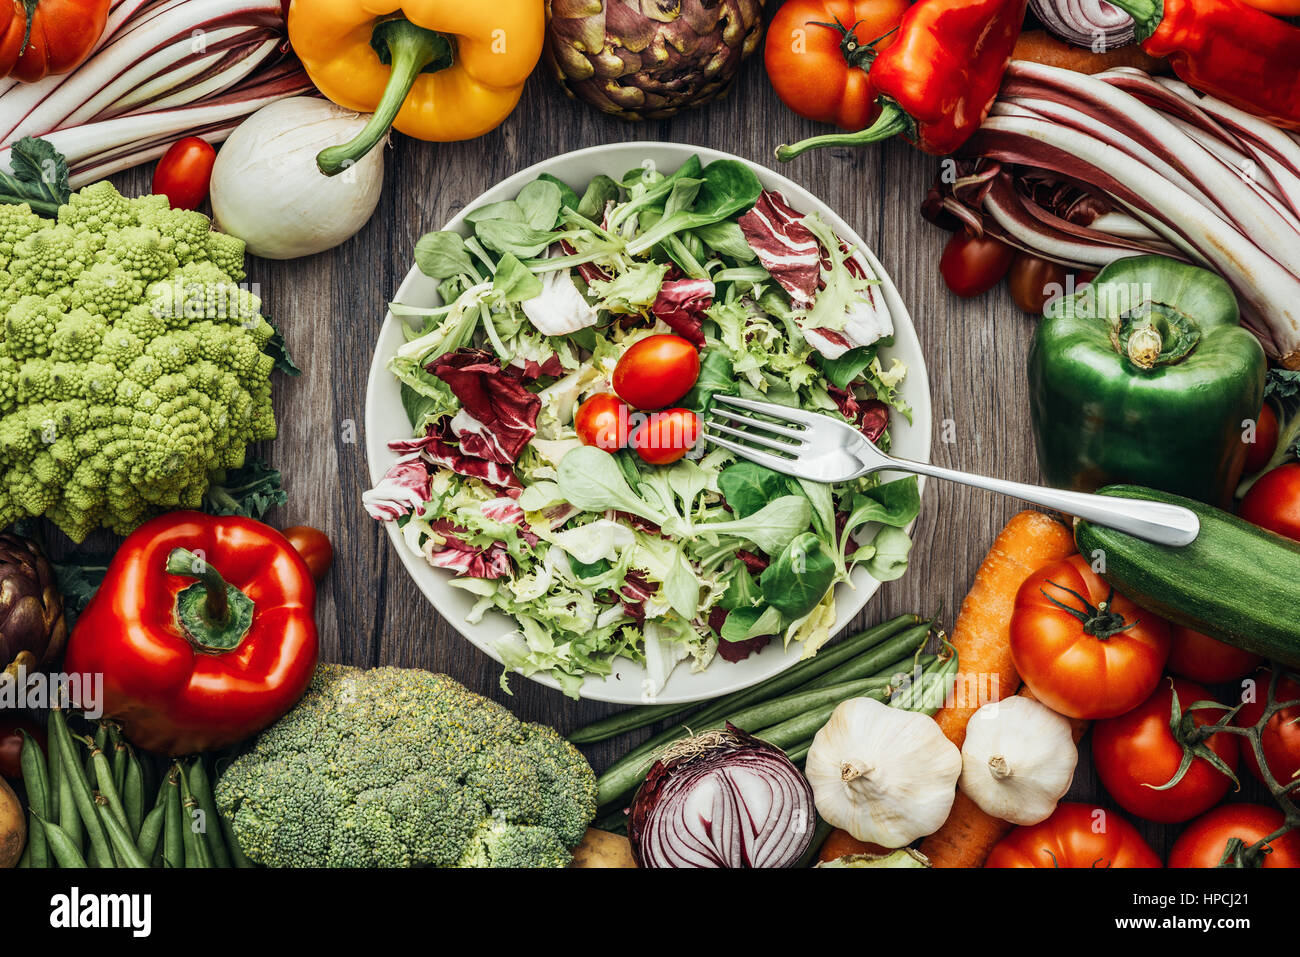 Fresh tasty vegetarian salad with seasonal ingredients surrounded by colorful vegetables, healthy vegetarian eating concept Stock Photo